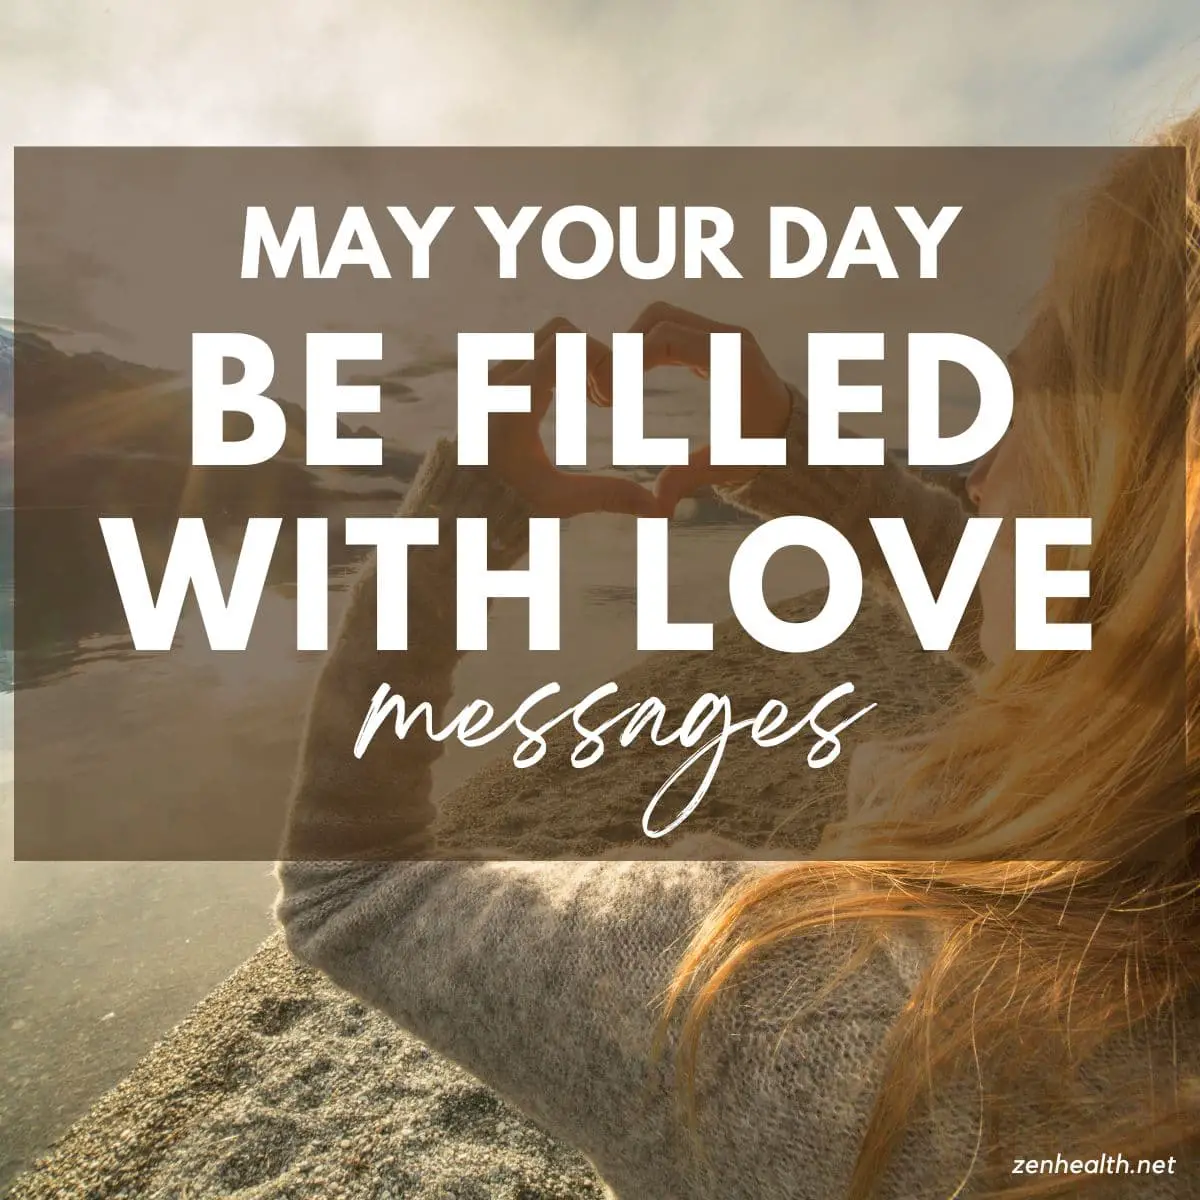 30 May Your Day be Filled with Love Messages